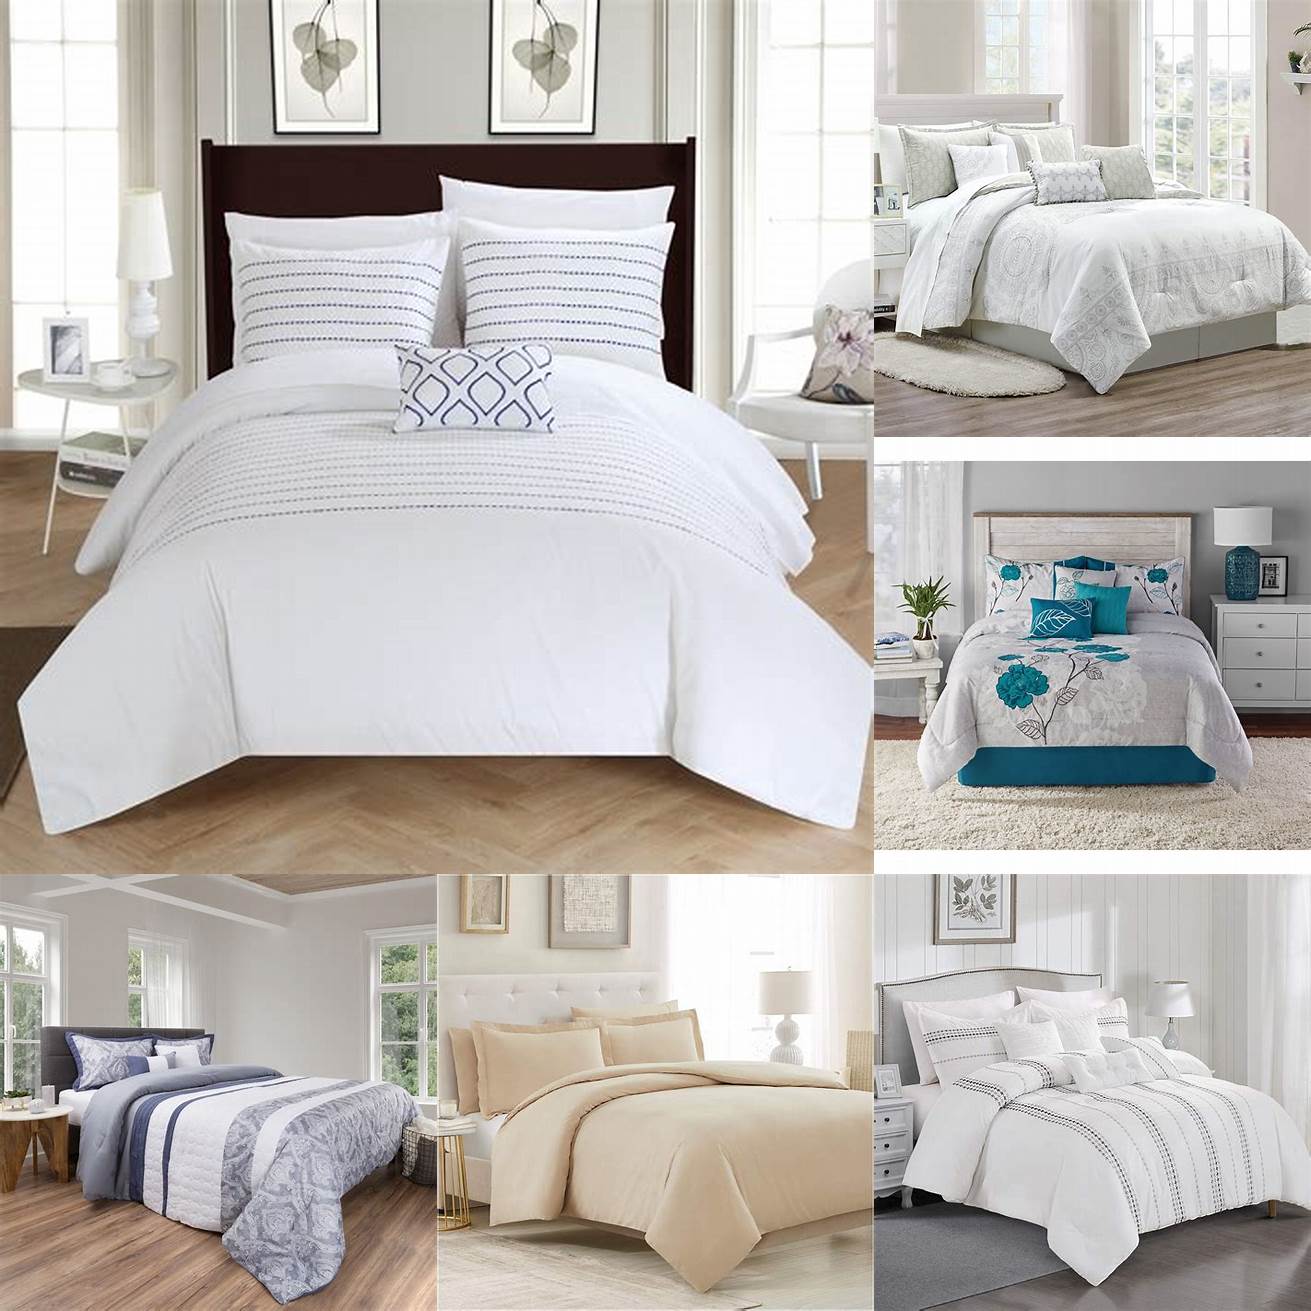 5 A Queen Bed Set with a duvet cover and matching shams